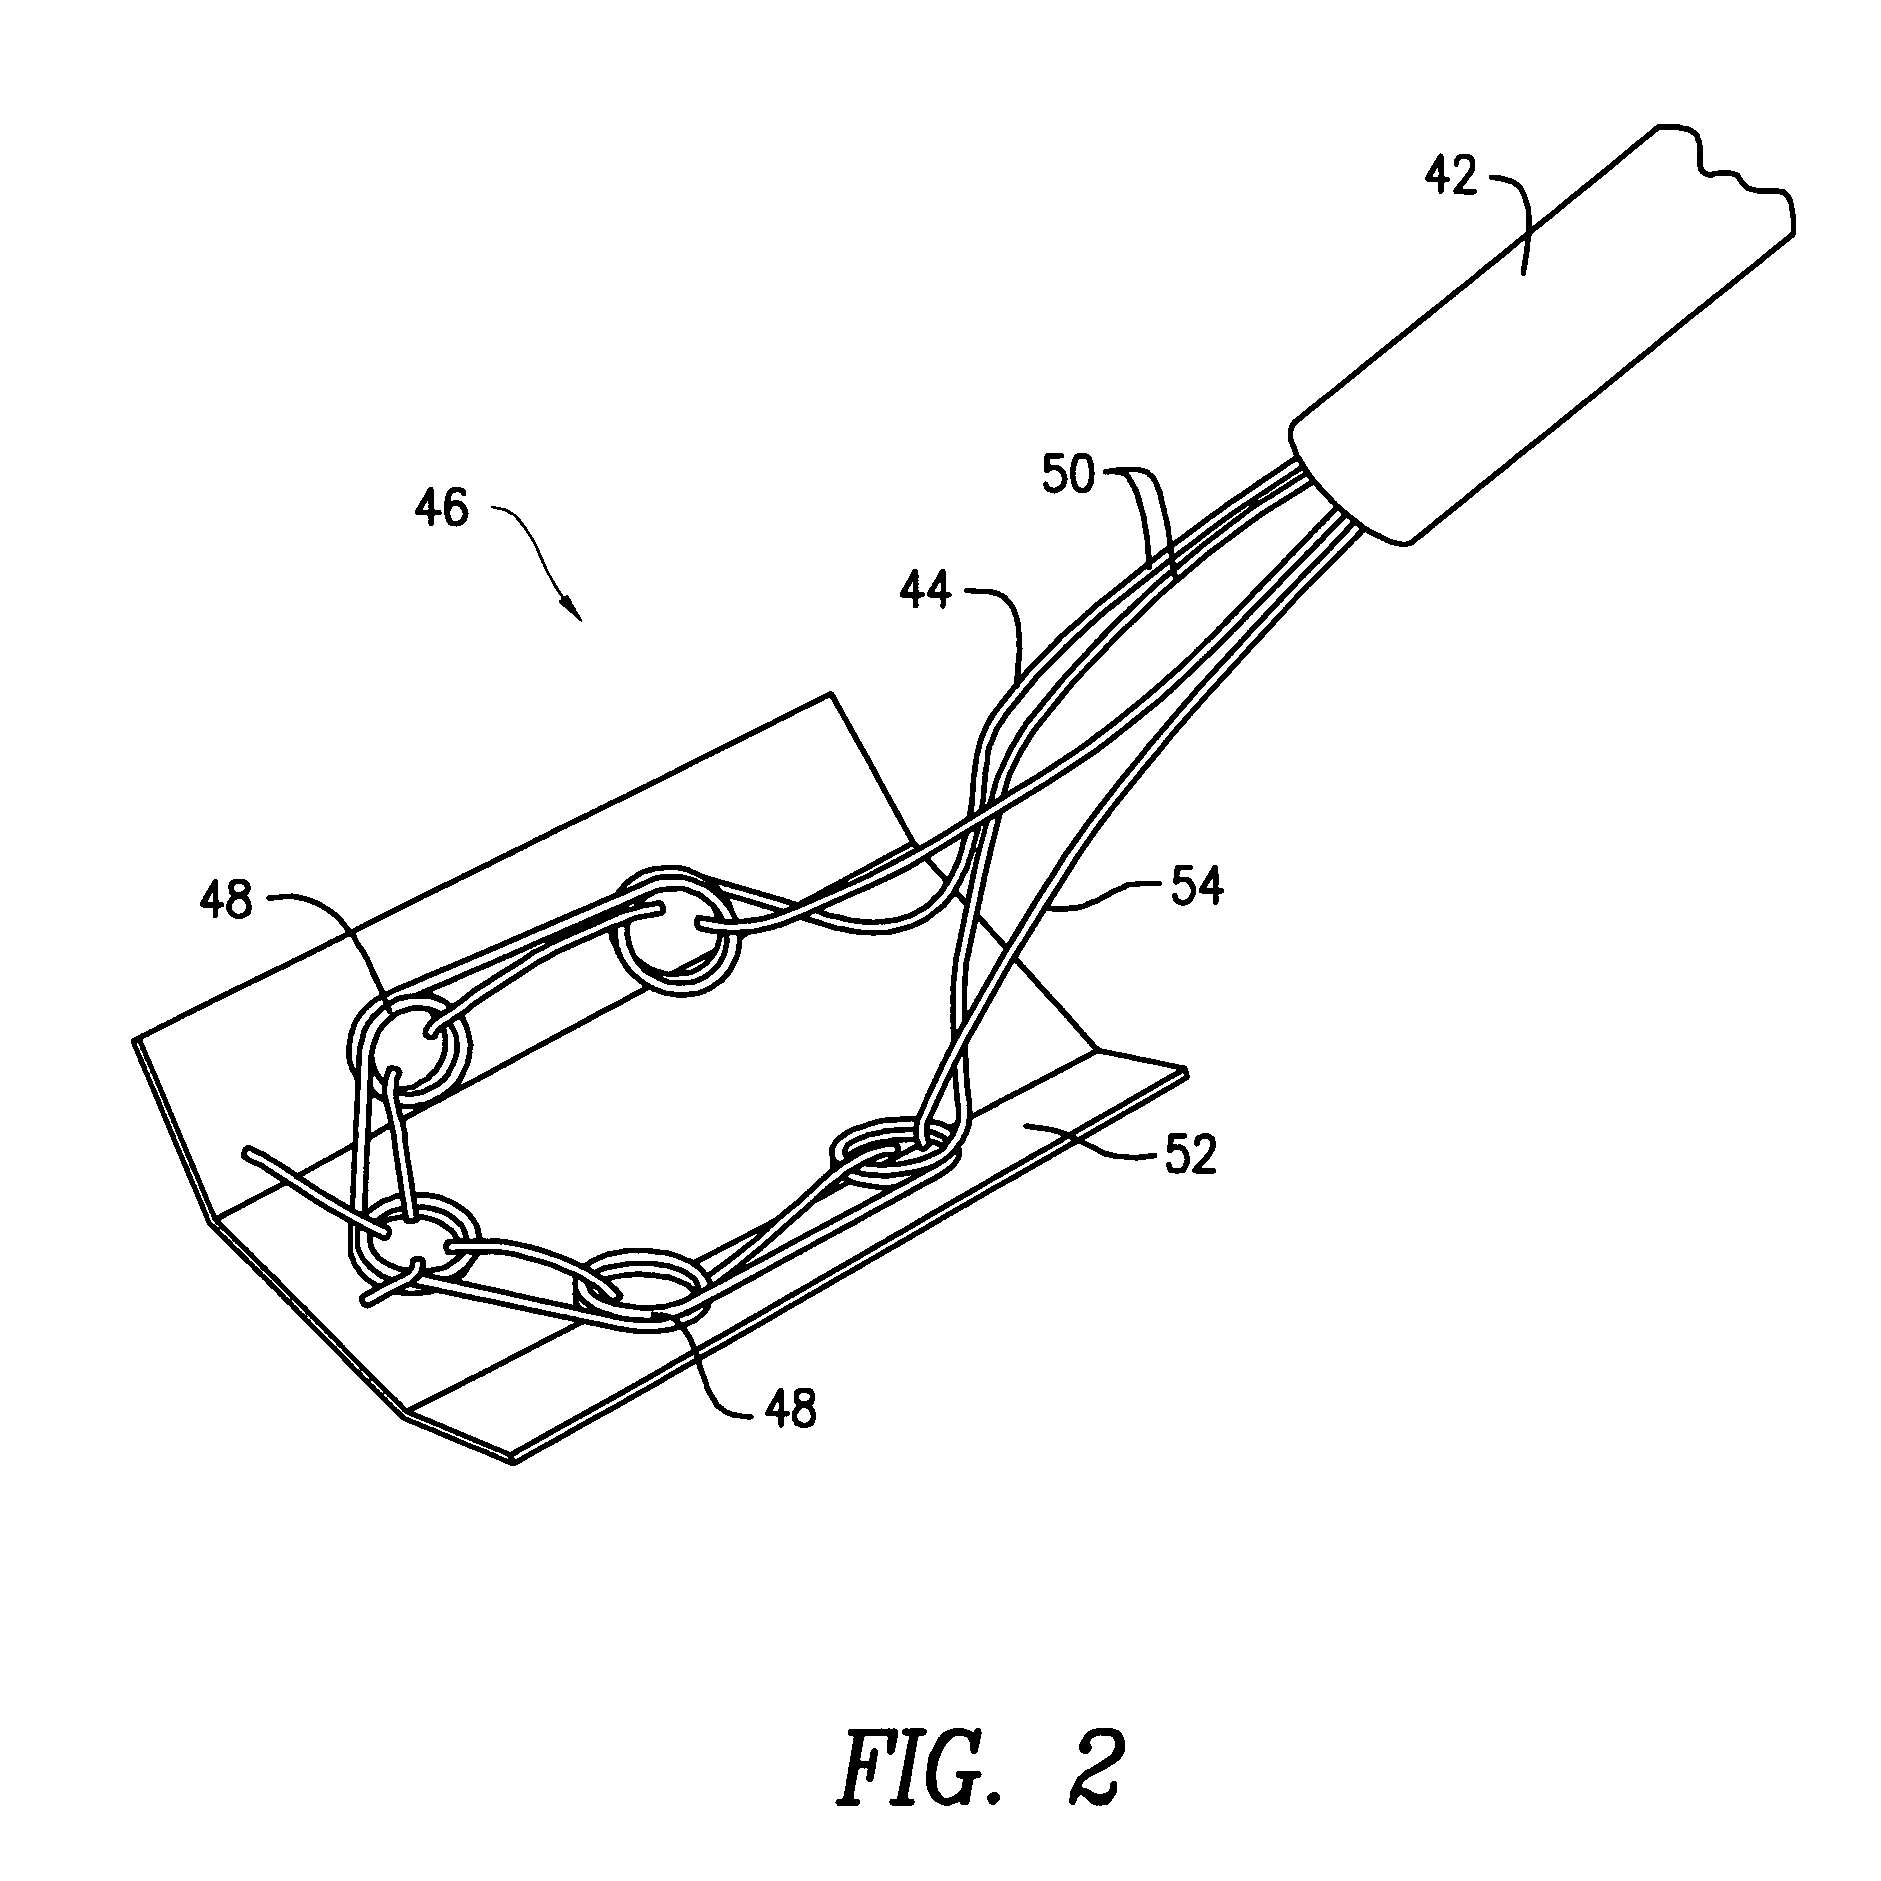 Augmentation delivery device